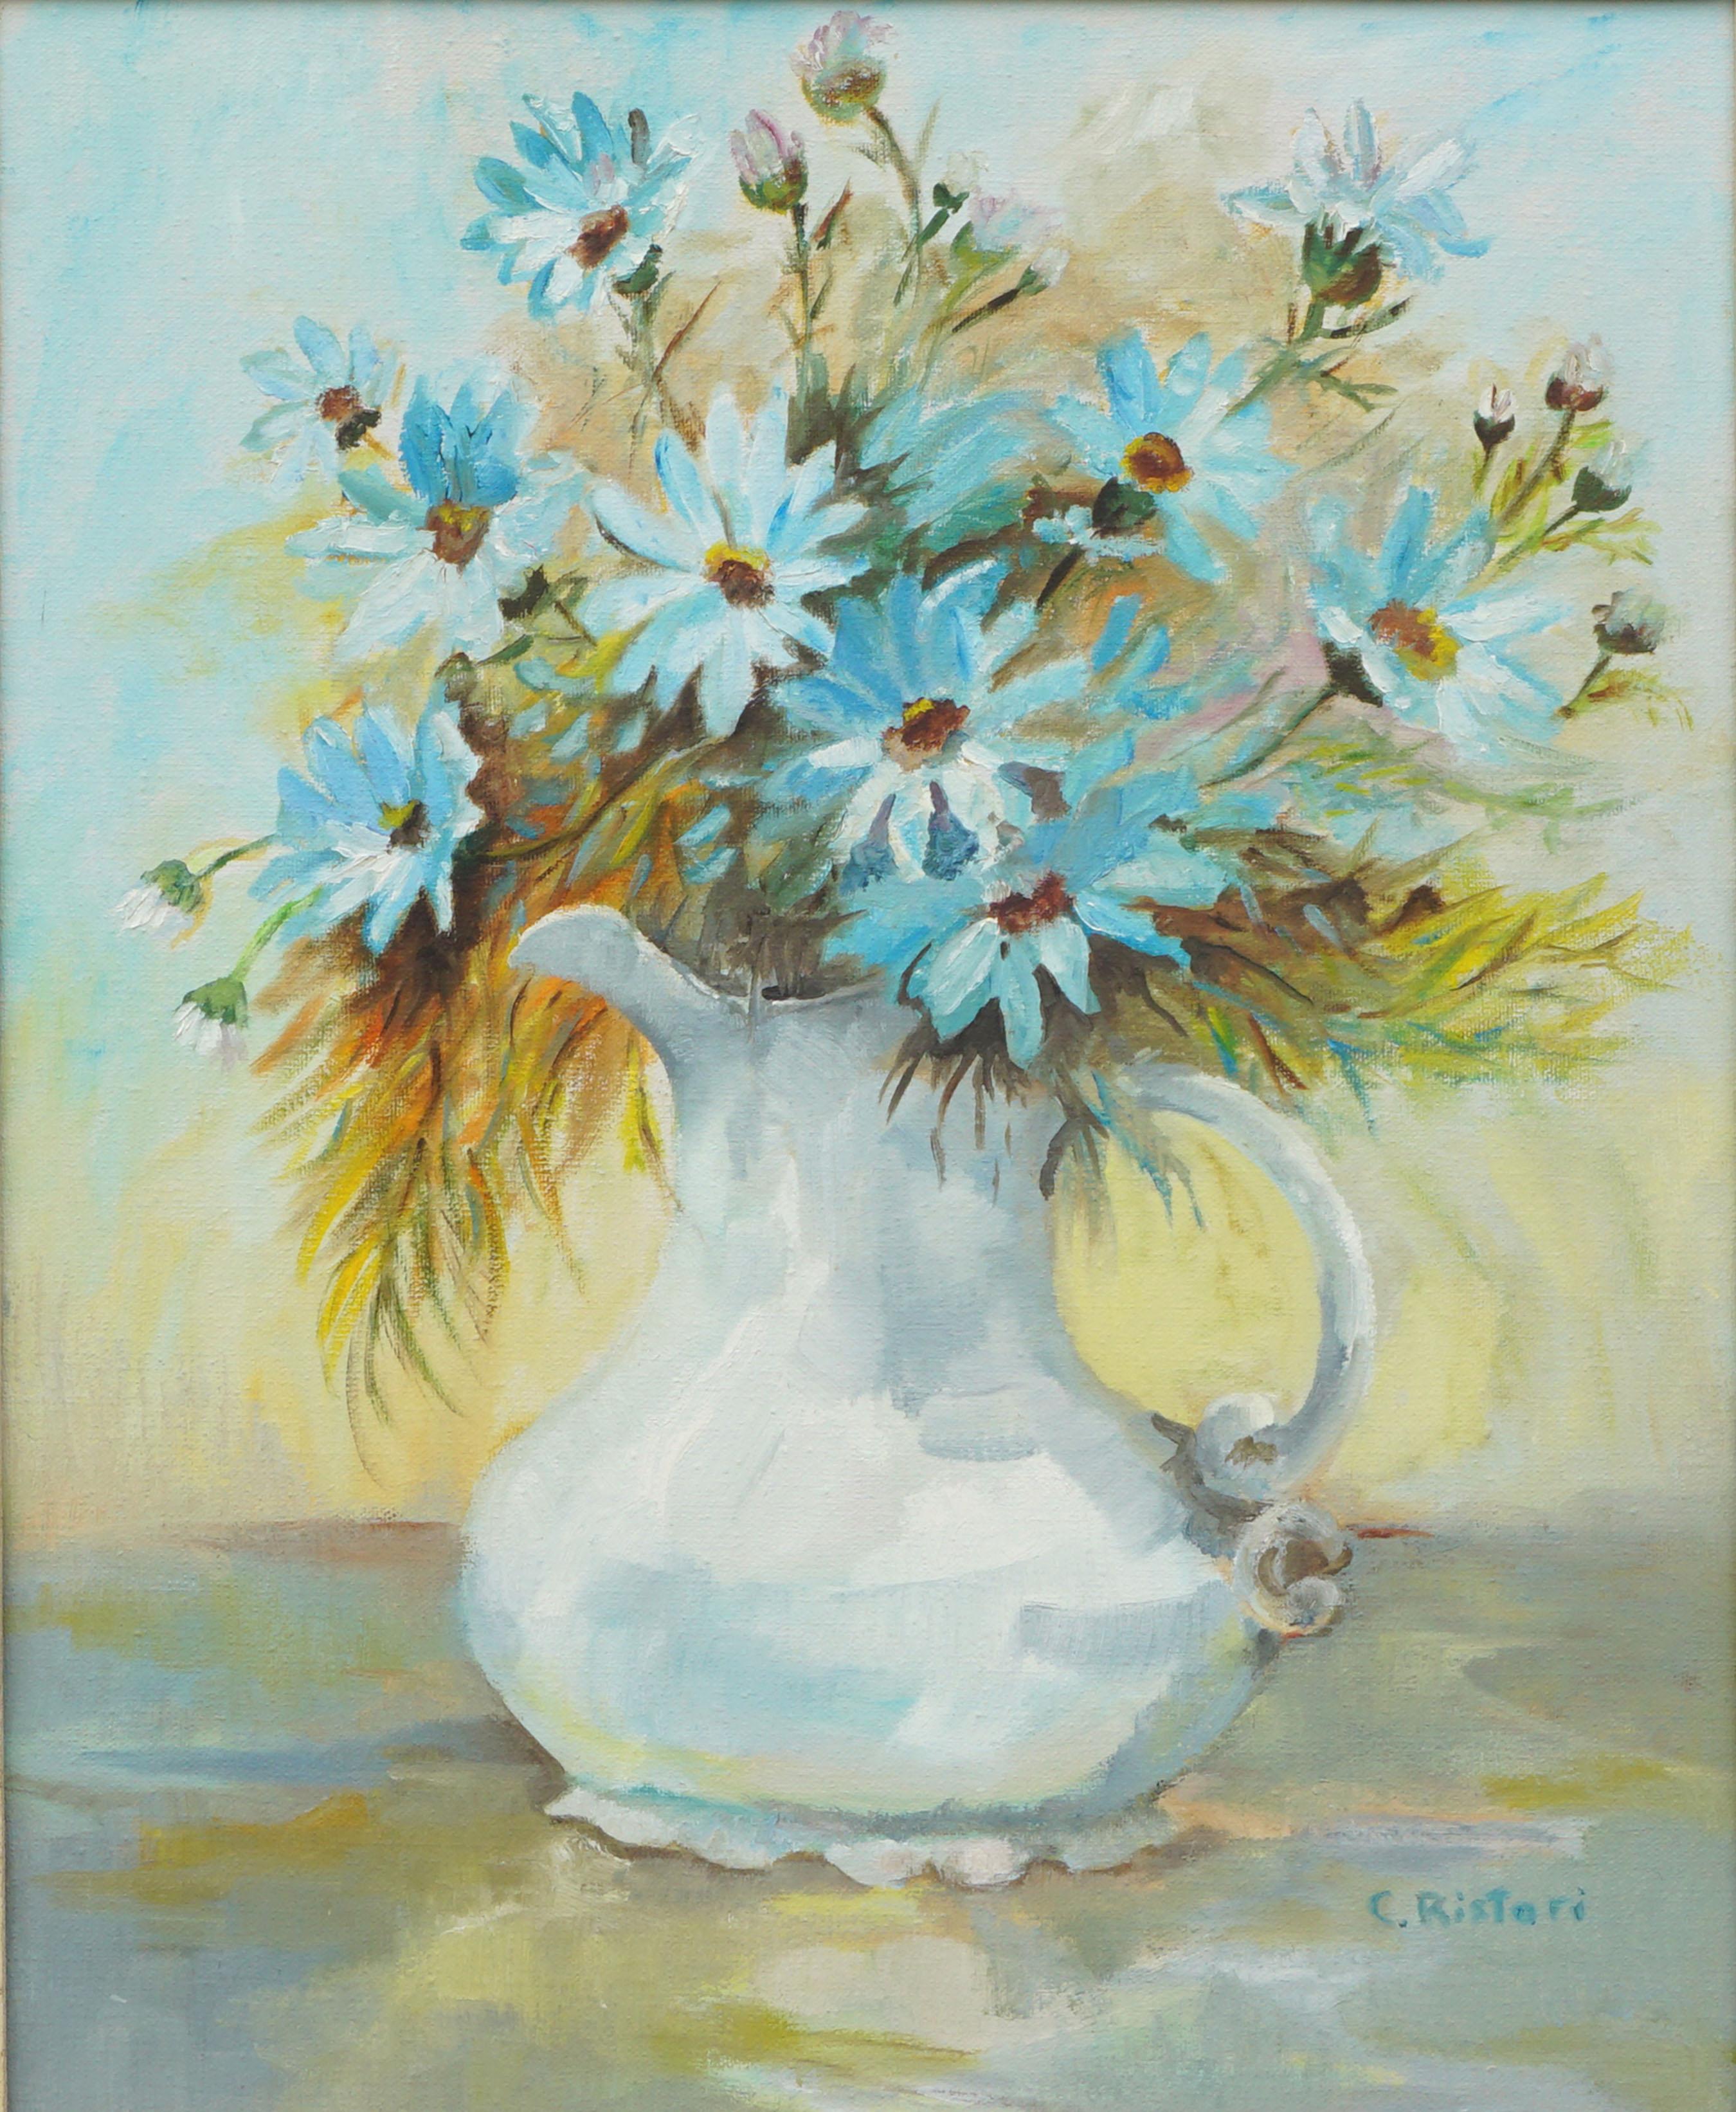 Mid Century Blue Floral Still Life  - Painting by Catherine Ristori